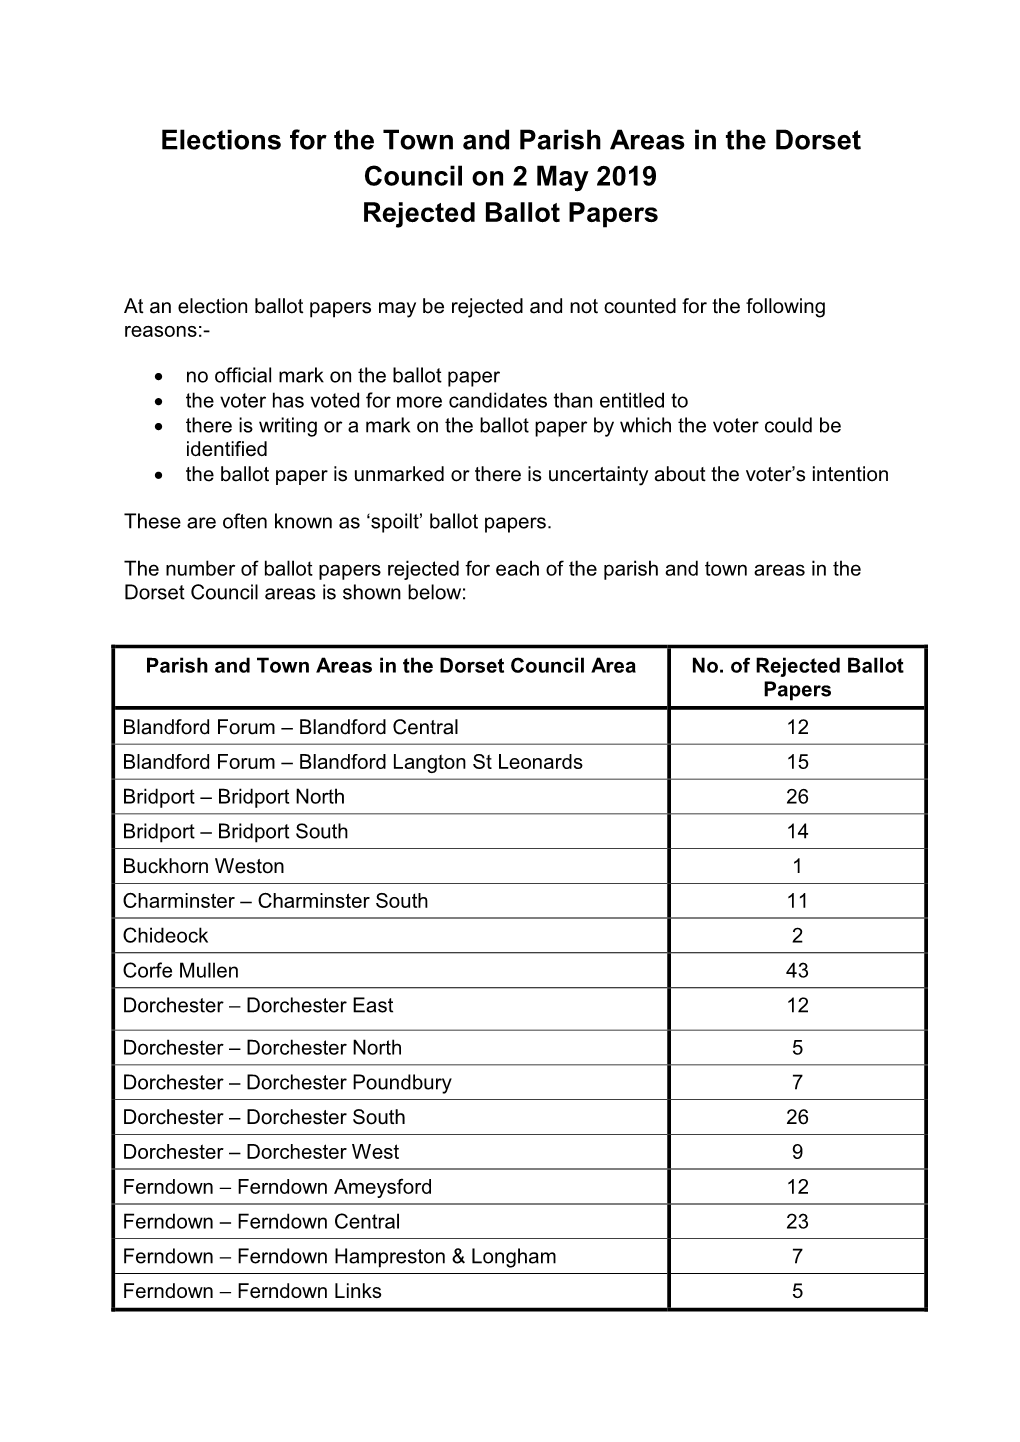 Elections for the Town and Parish Areas in the Dorset Council on 2 May 2019 Rejected Ballot Papers